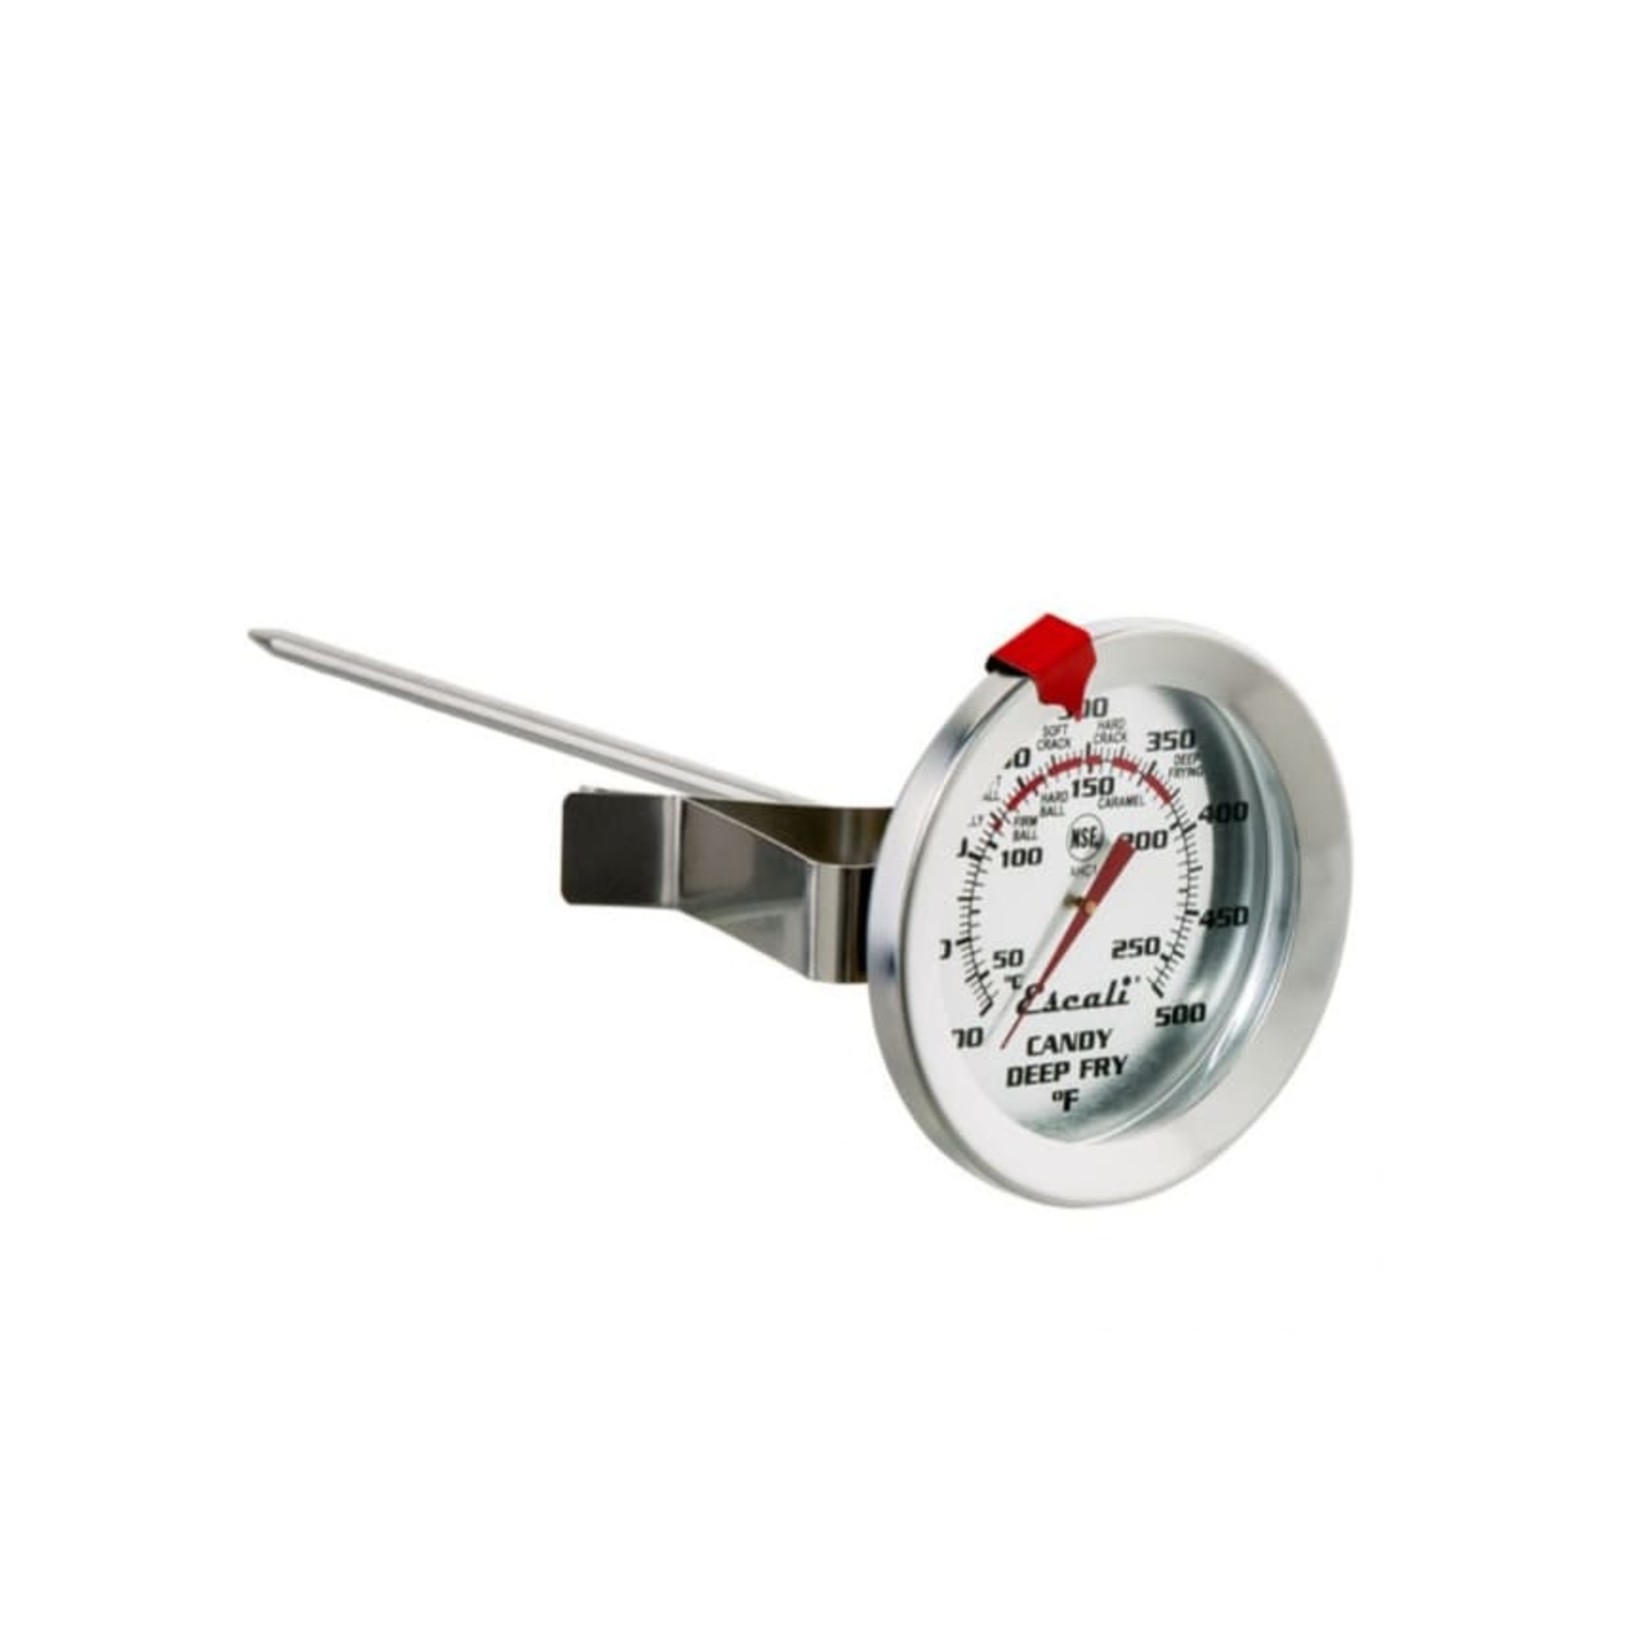 ESCALI ESCALI Candy / Deep Fry Thermometer